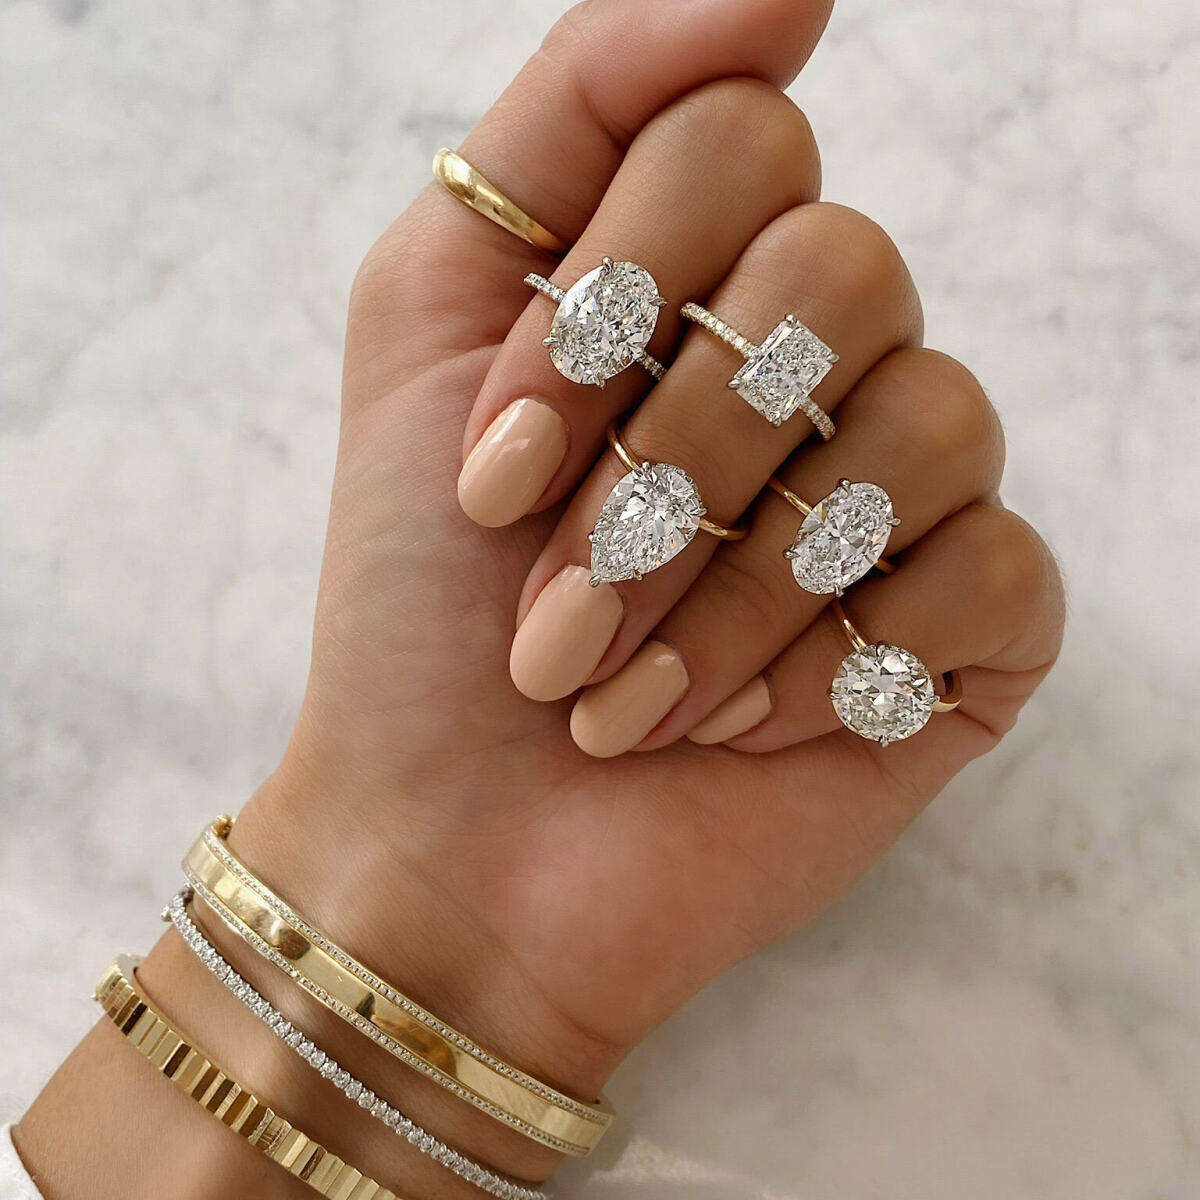 Wedding Ring Design: Five different engagement rings being worn on one hand for display.